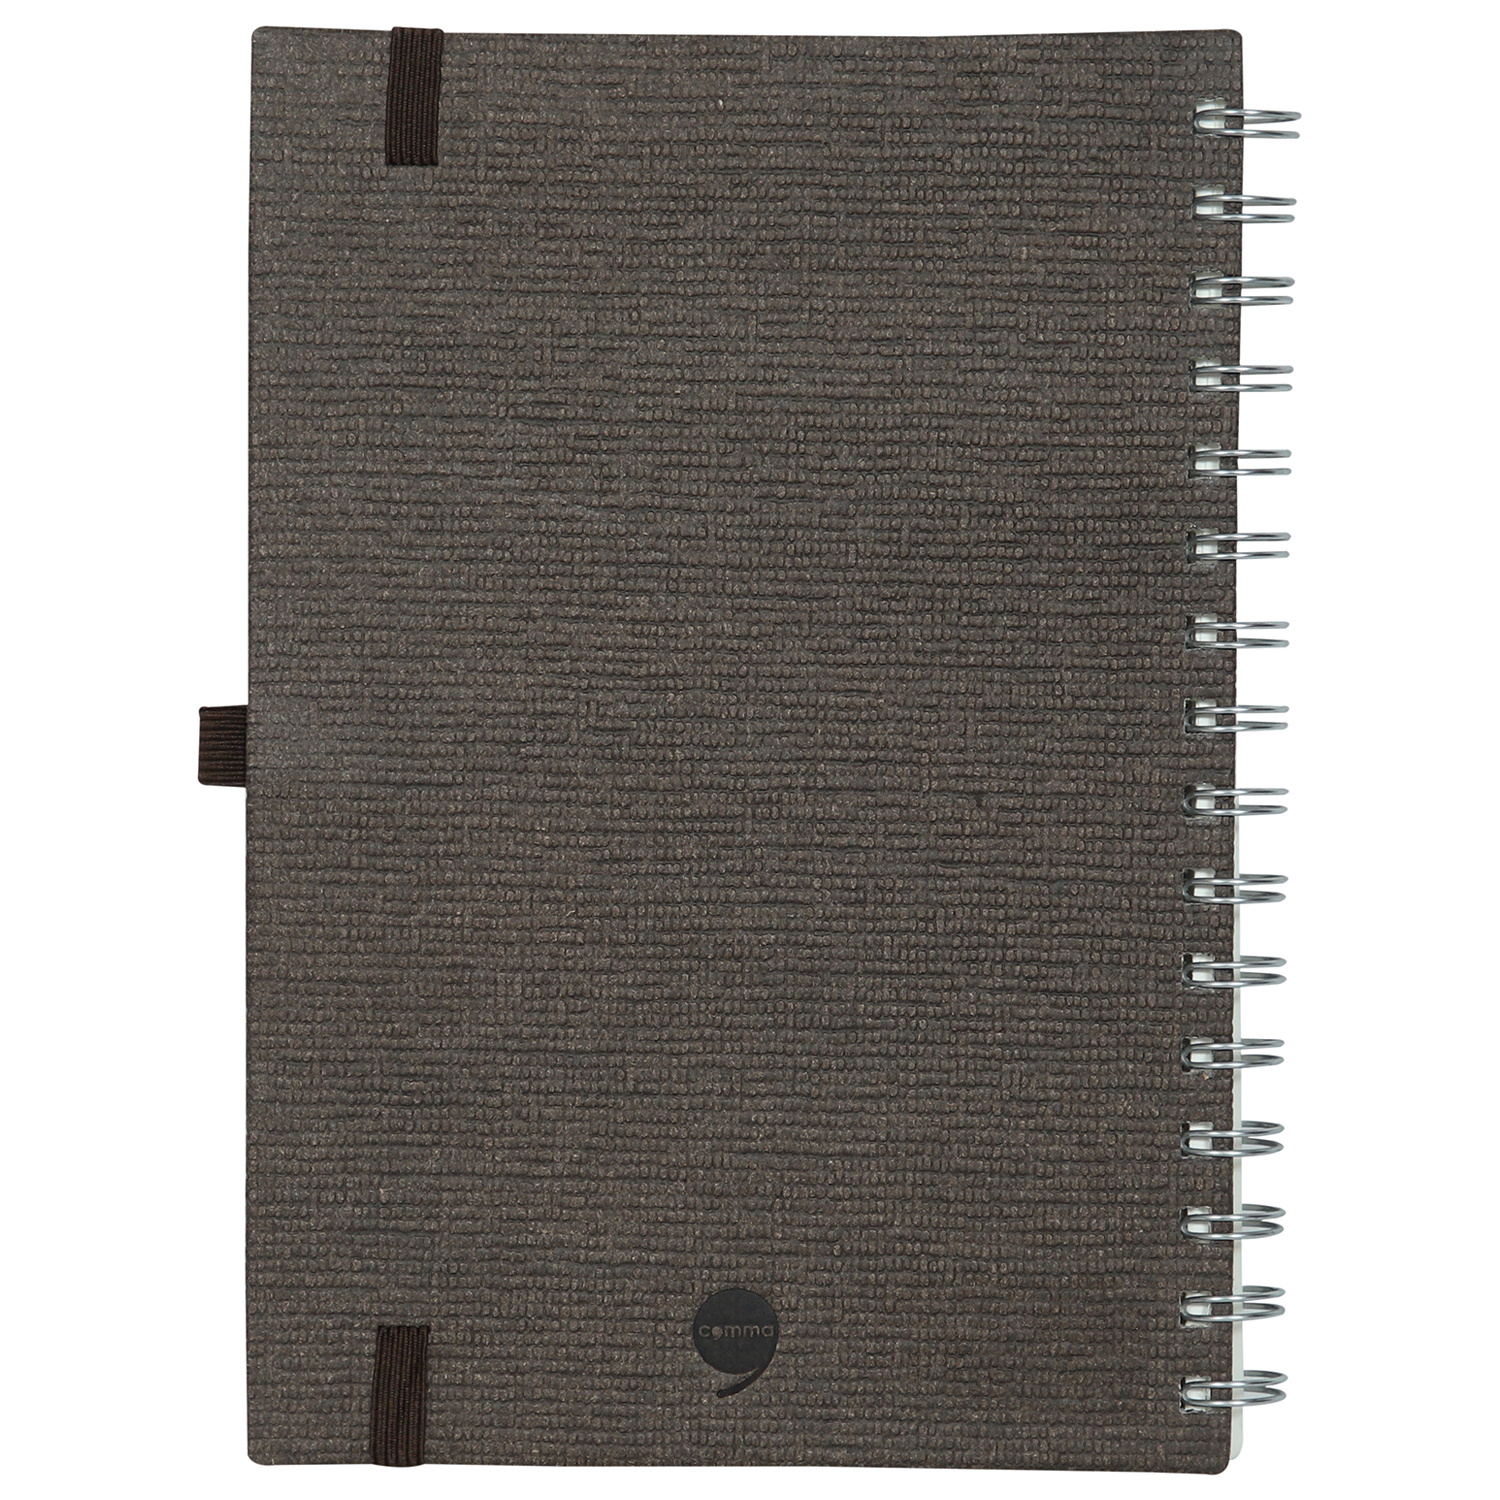 Comma Abaca - A5 Size - Wire-o-bound Notebook (Chocolate)